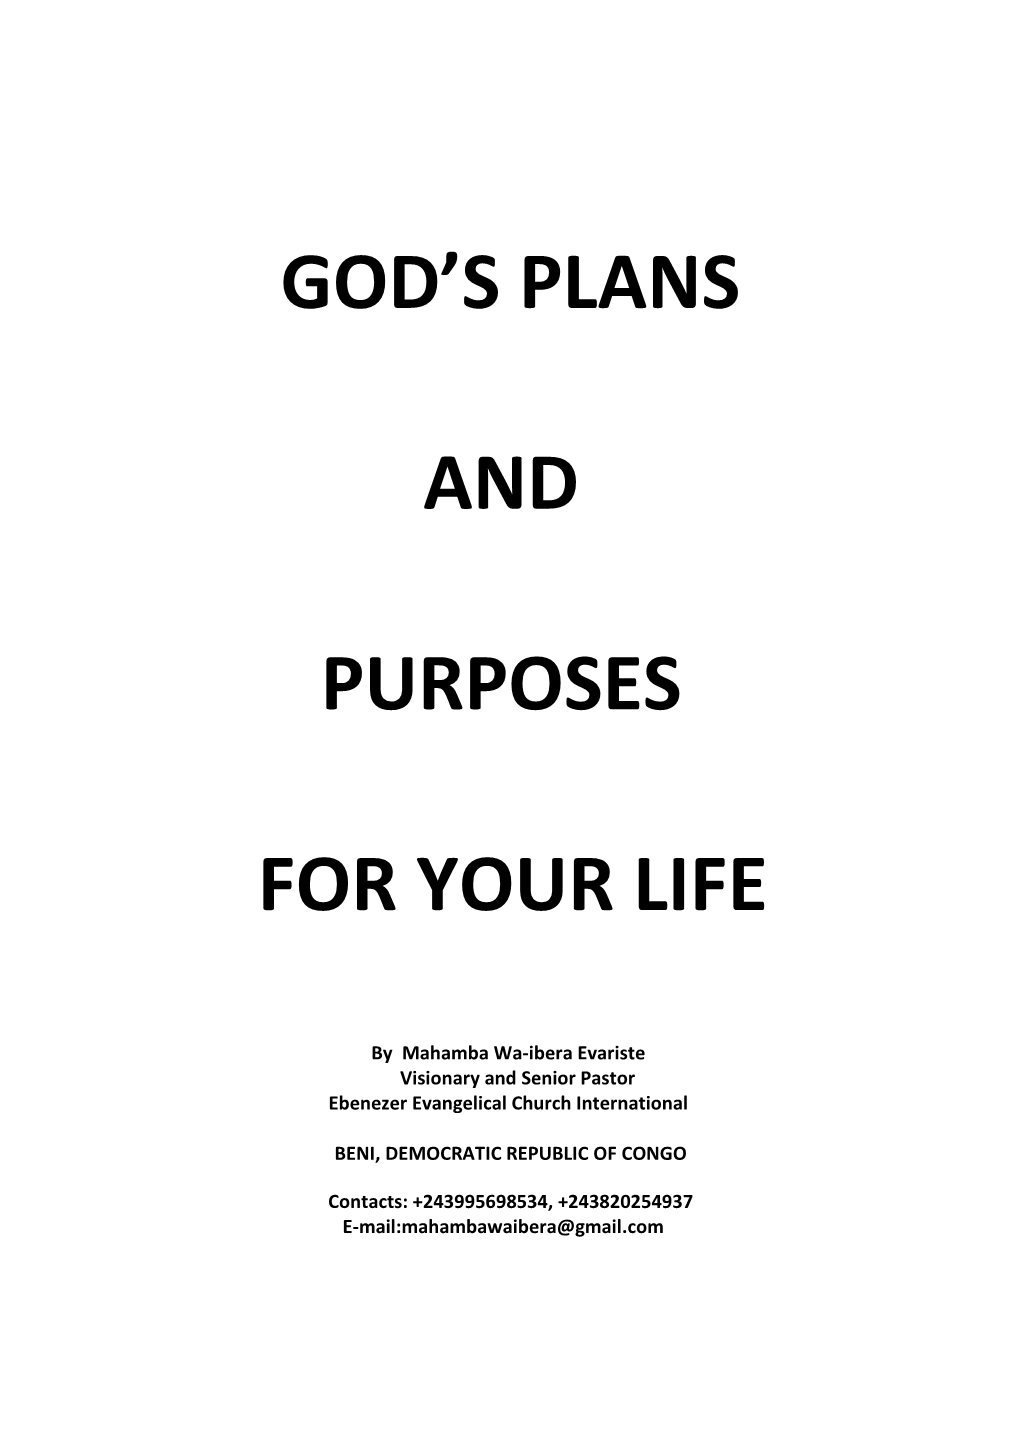 God's Plans and Purposes for Your Life